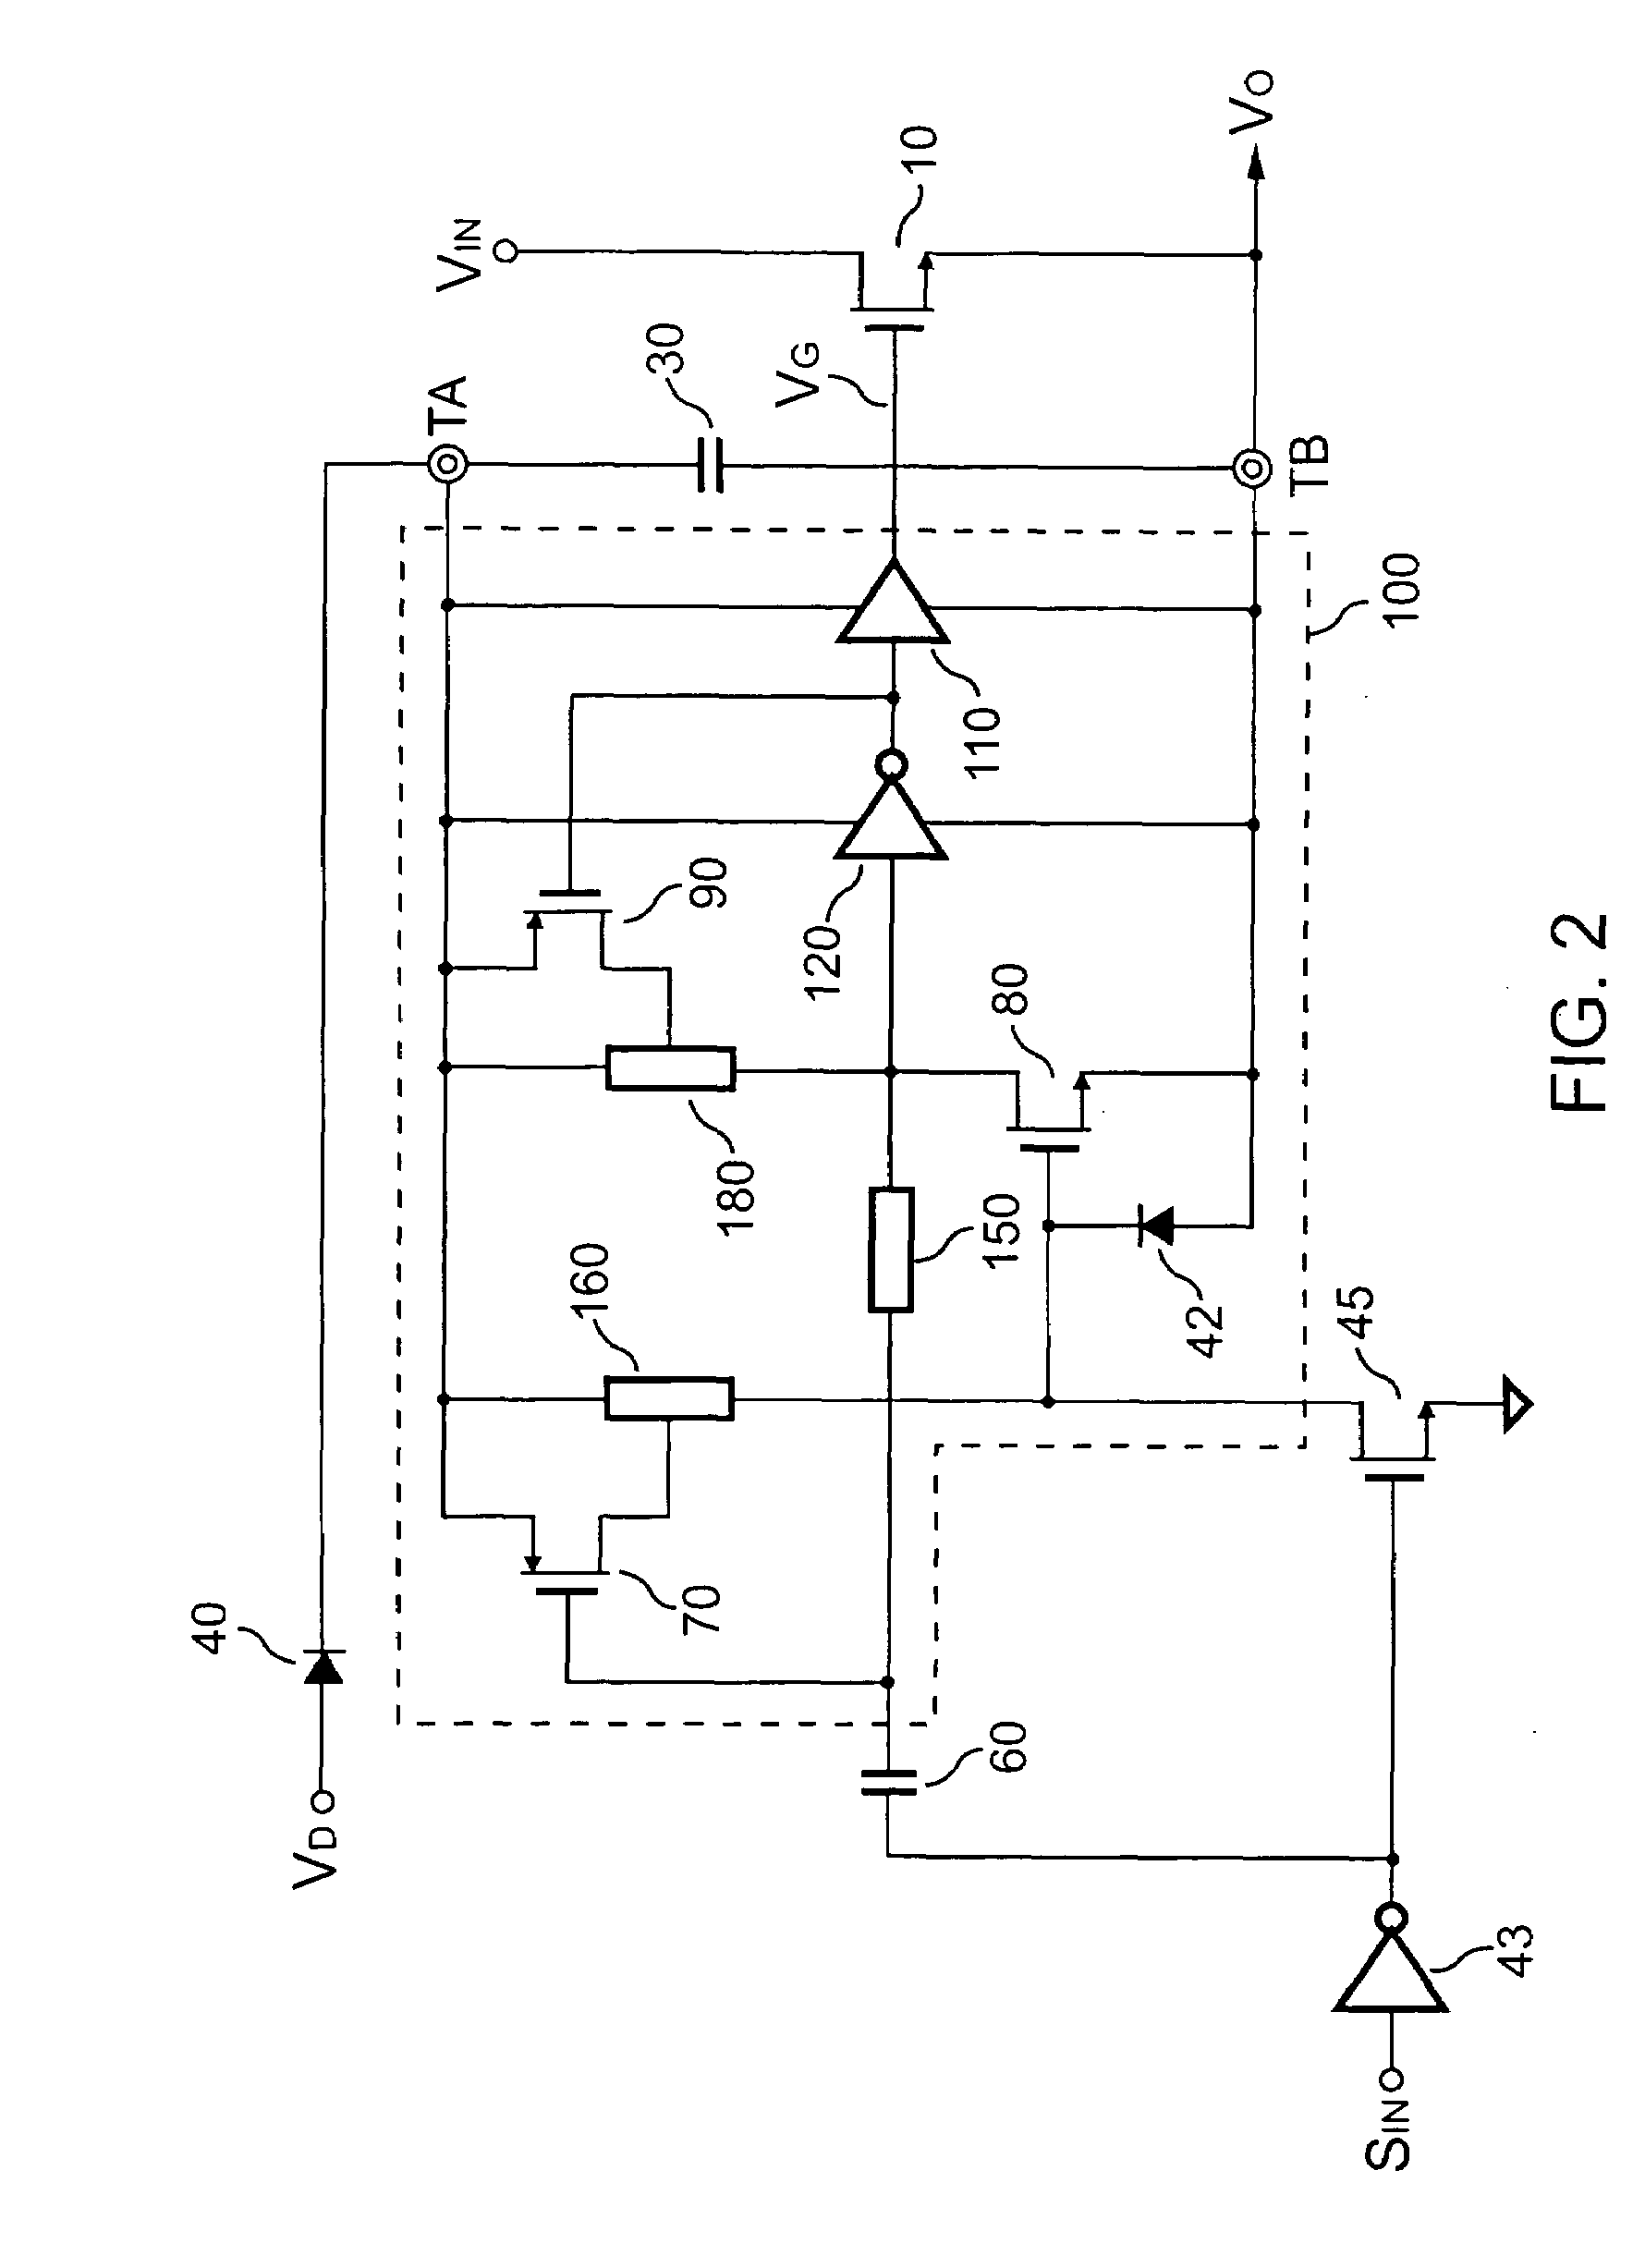 High-side transistor driver having positive feedback for improving speed and power saving